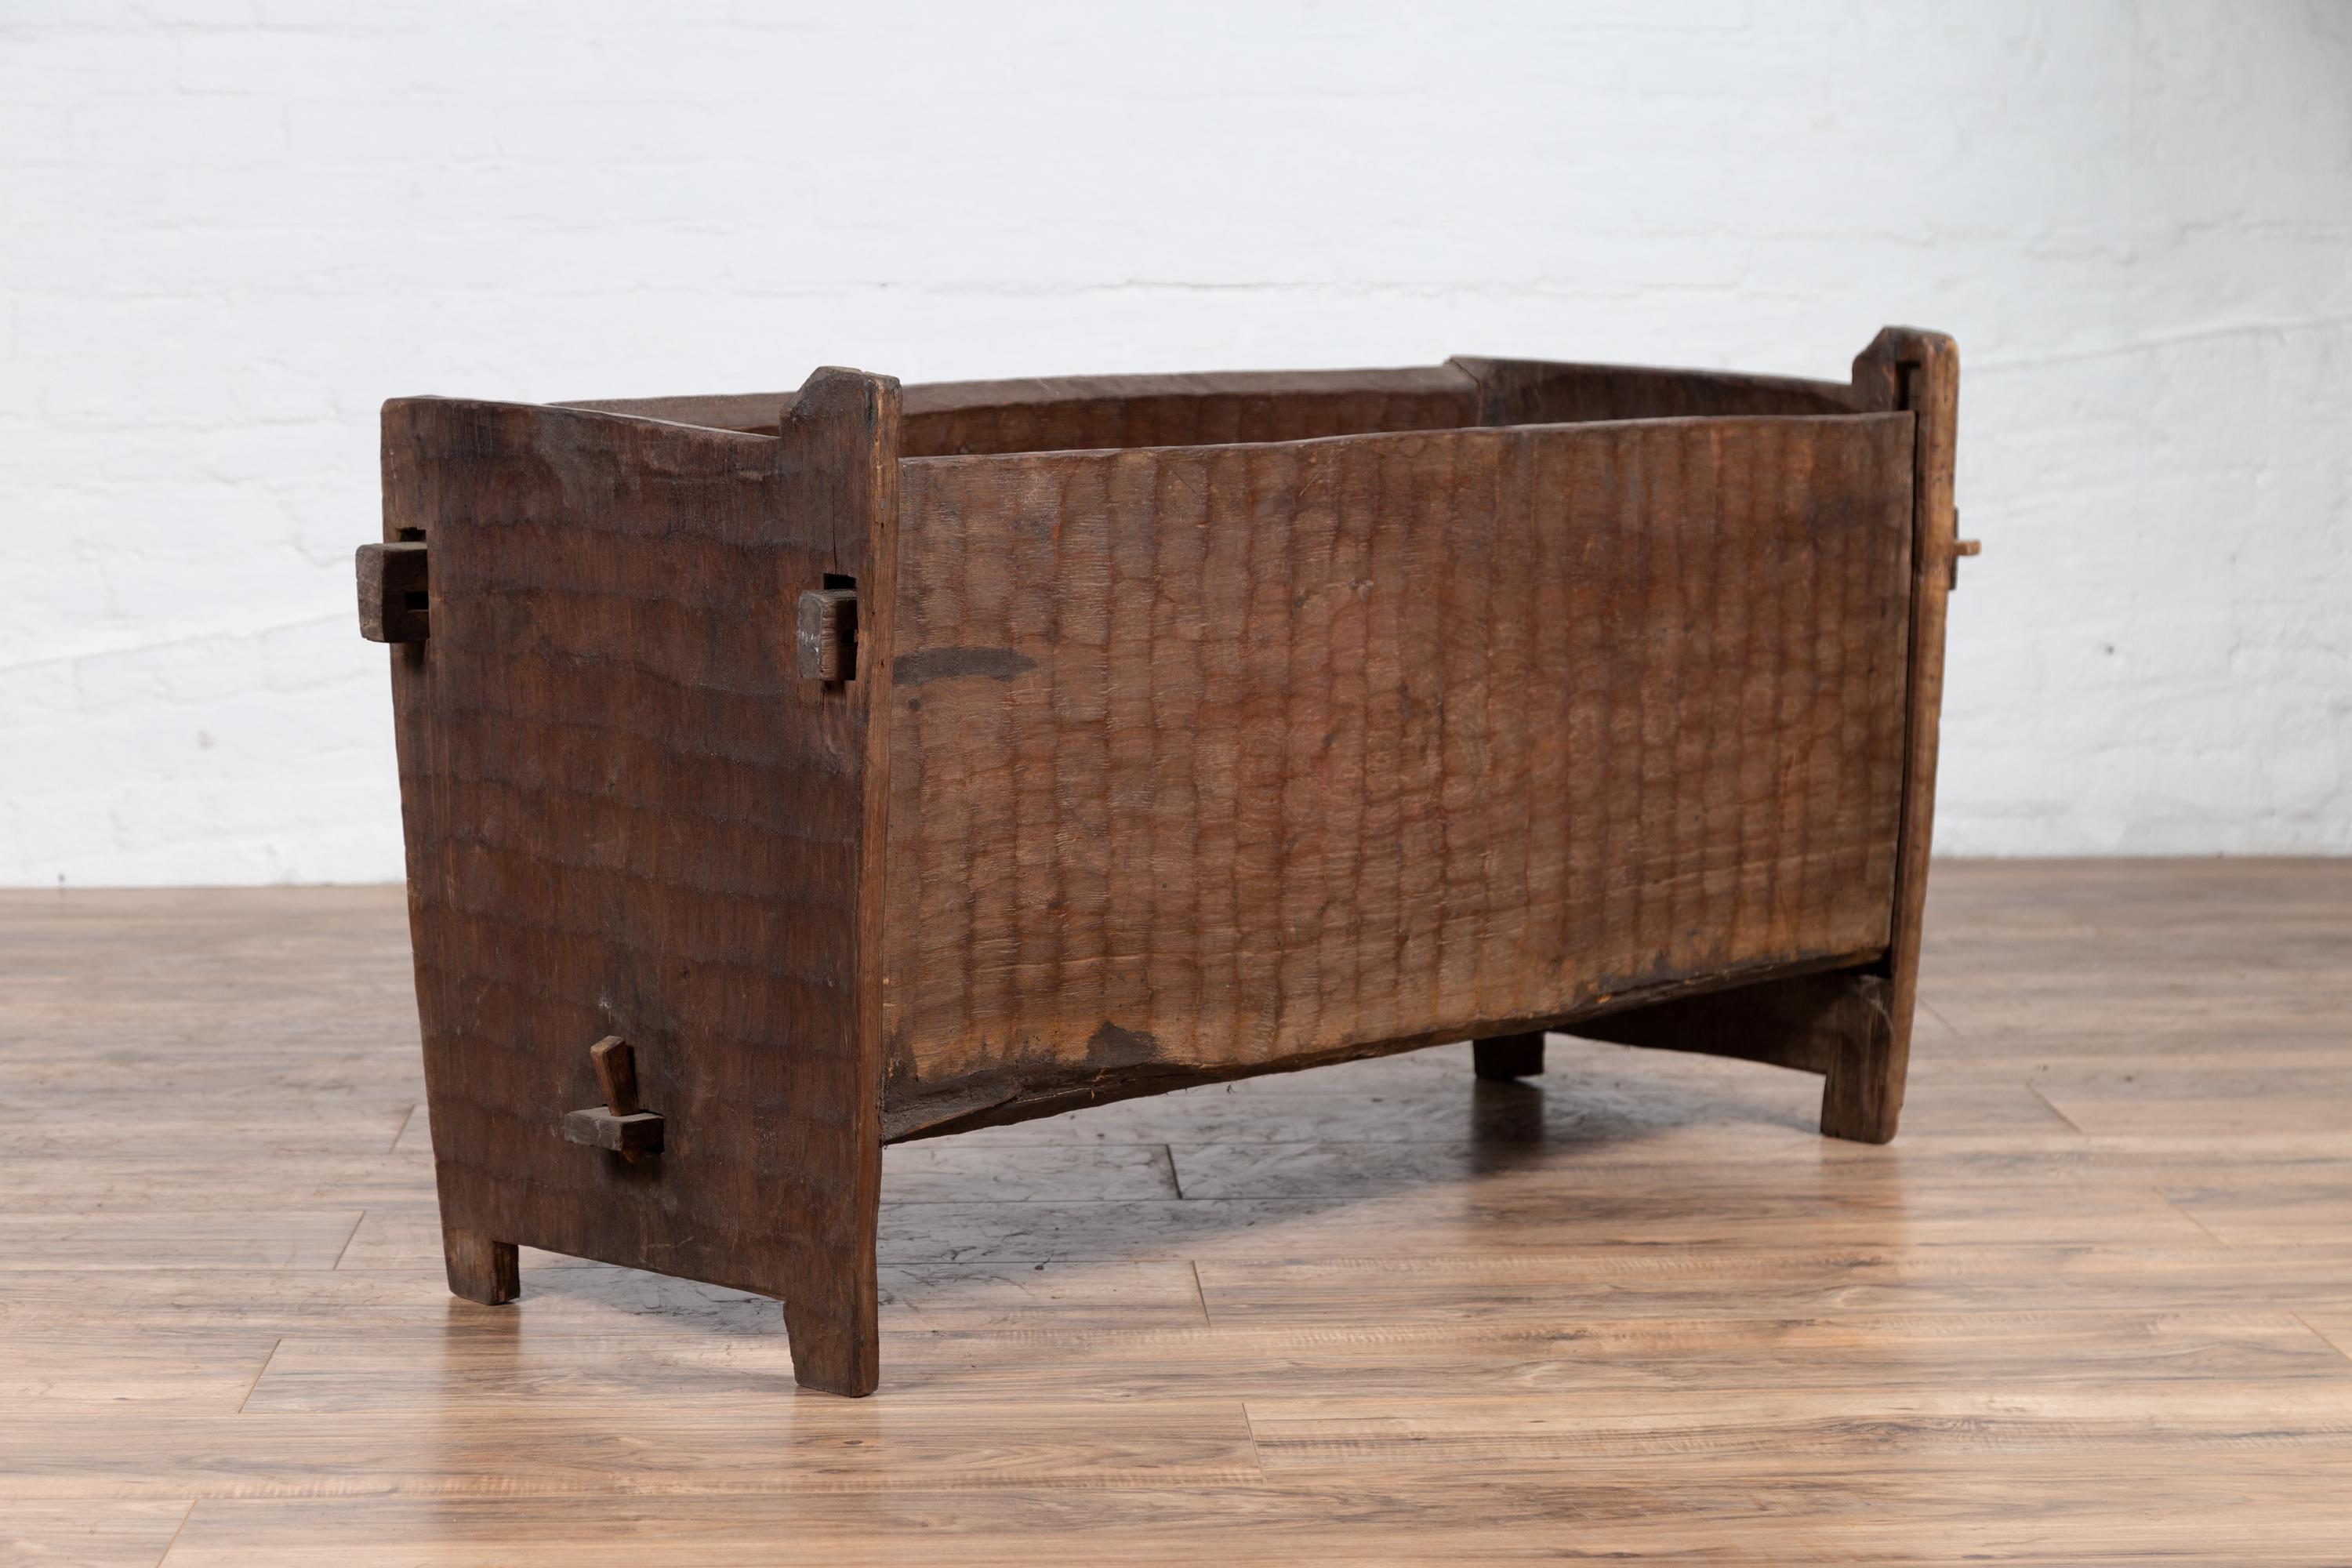 Antique Indian Rustic Wooden Planter Box with Weathered Patina and Chiseled Body For Sale 5